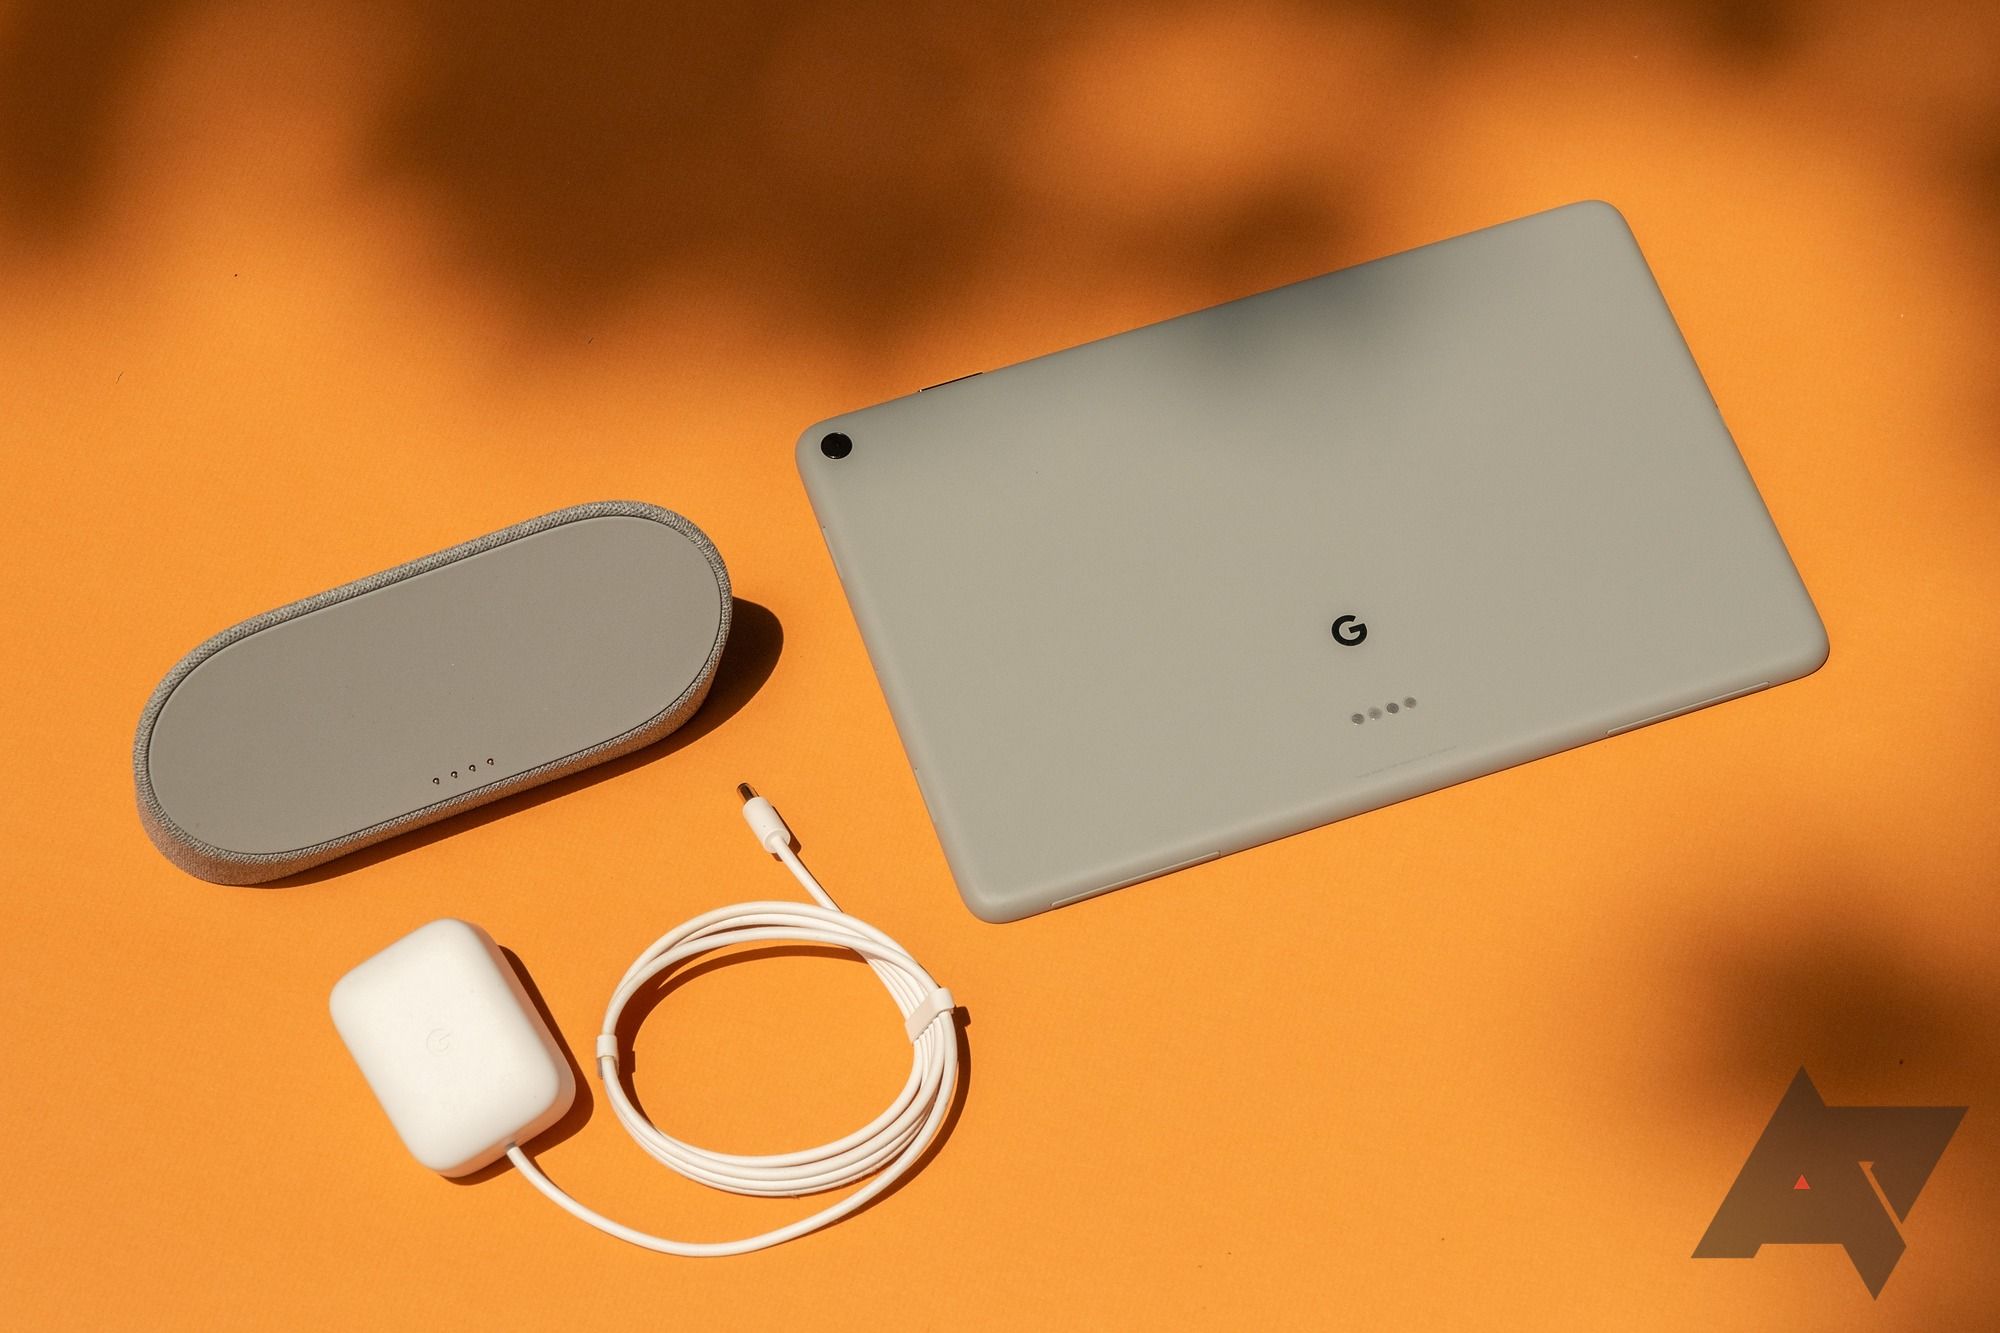 Google Pixel Tablet: Price, release date, specs, and news